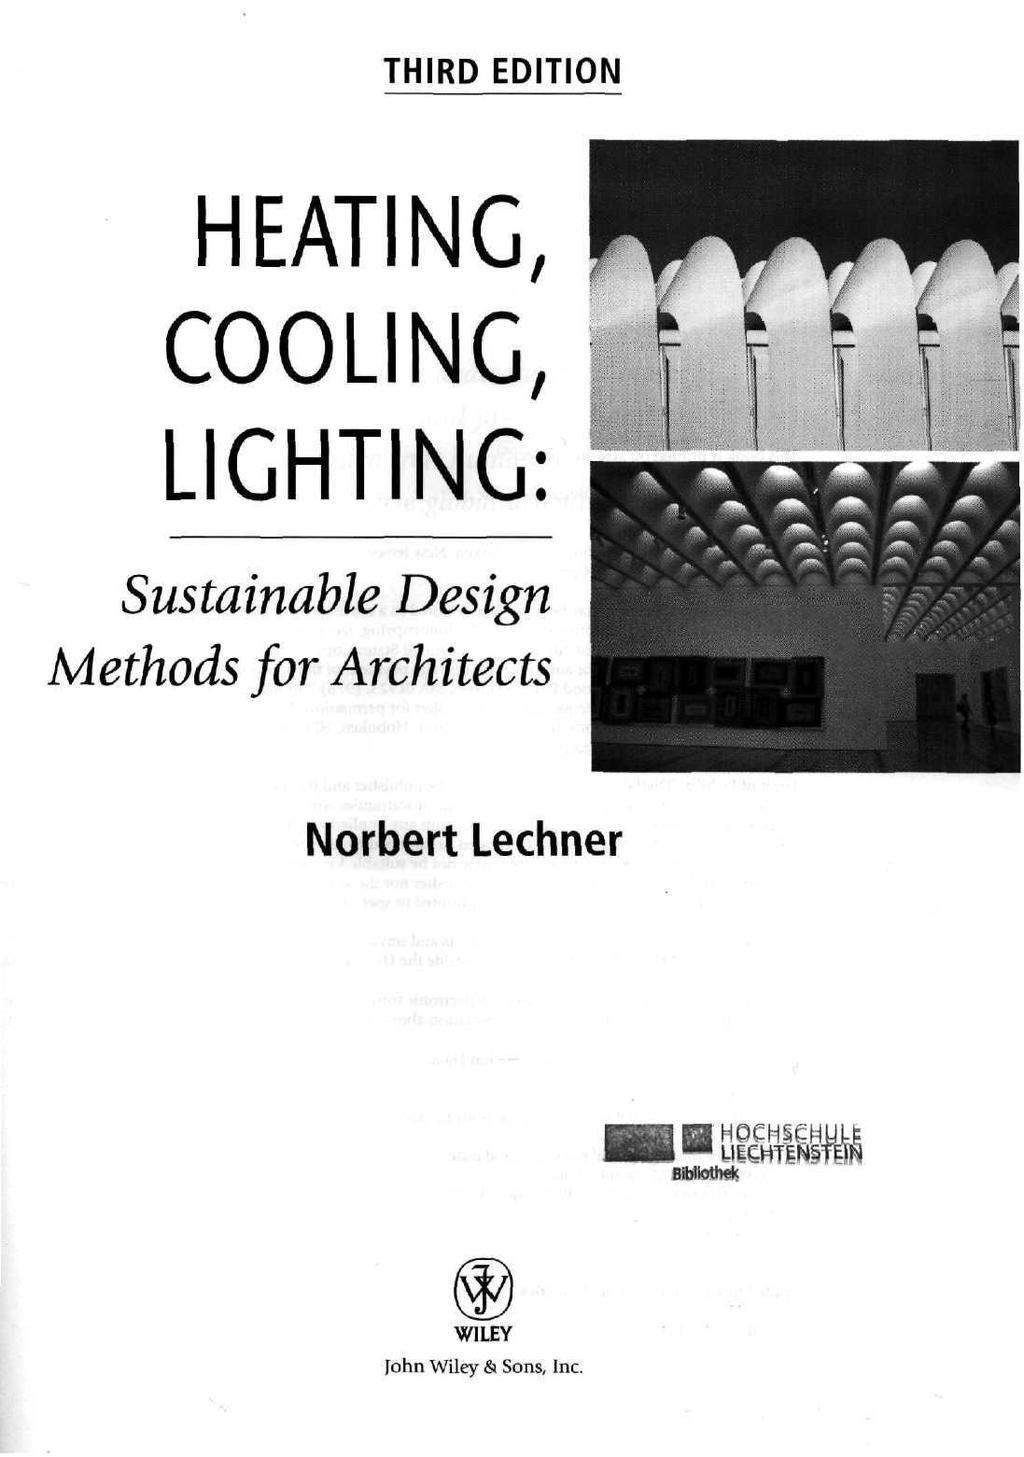 THIRD EDITION HEATING, COOLING, LIGHTING: Sustainable Design Methods